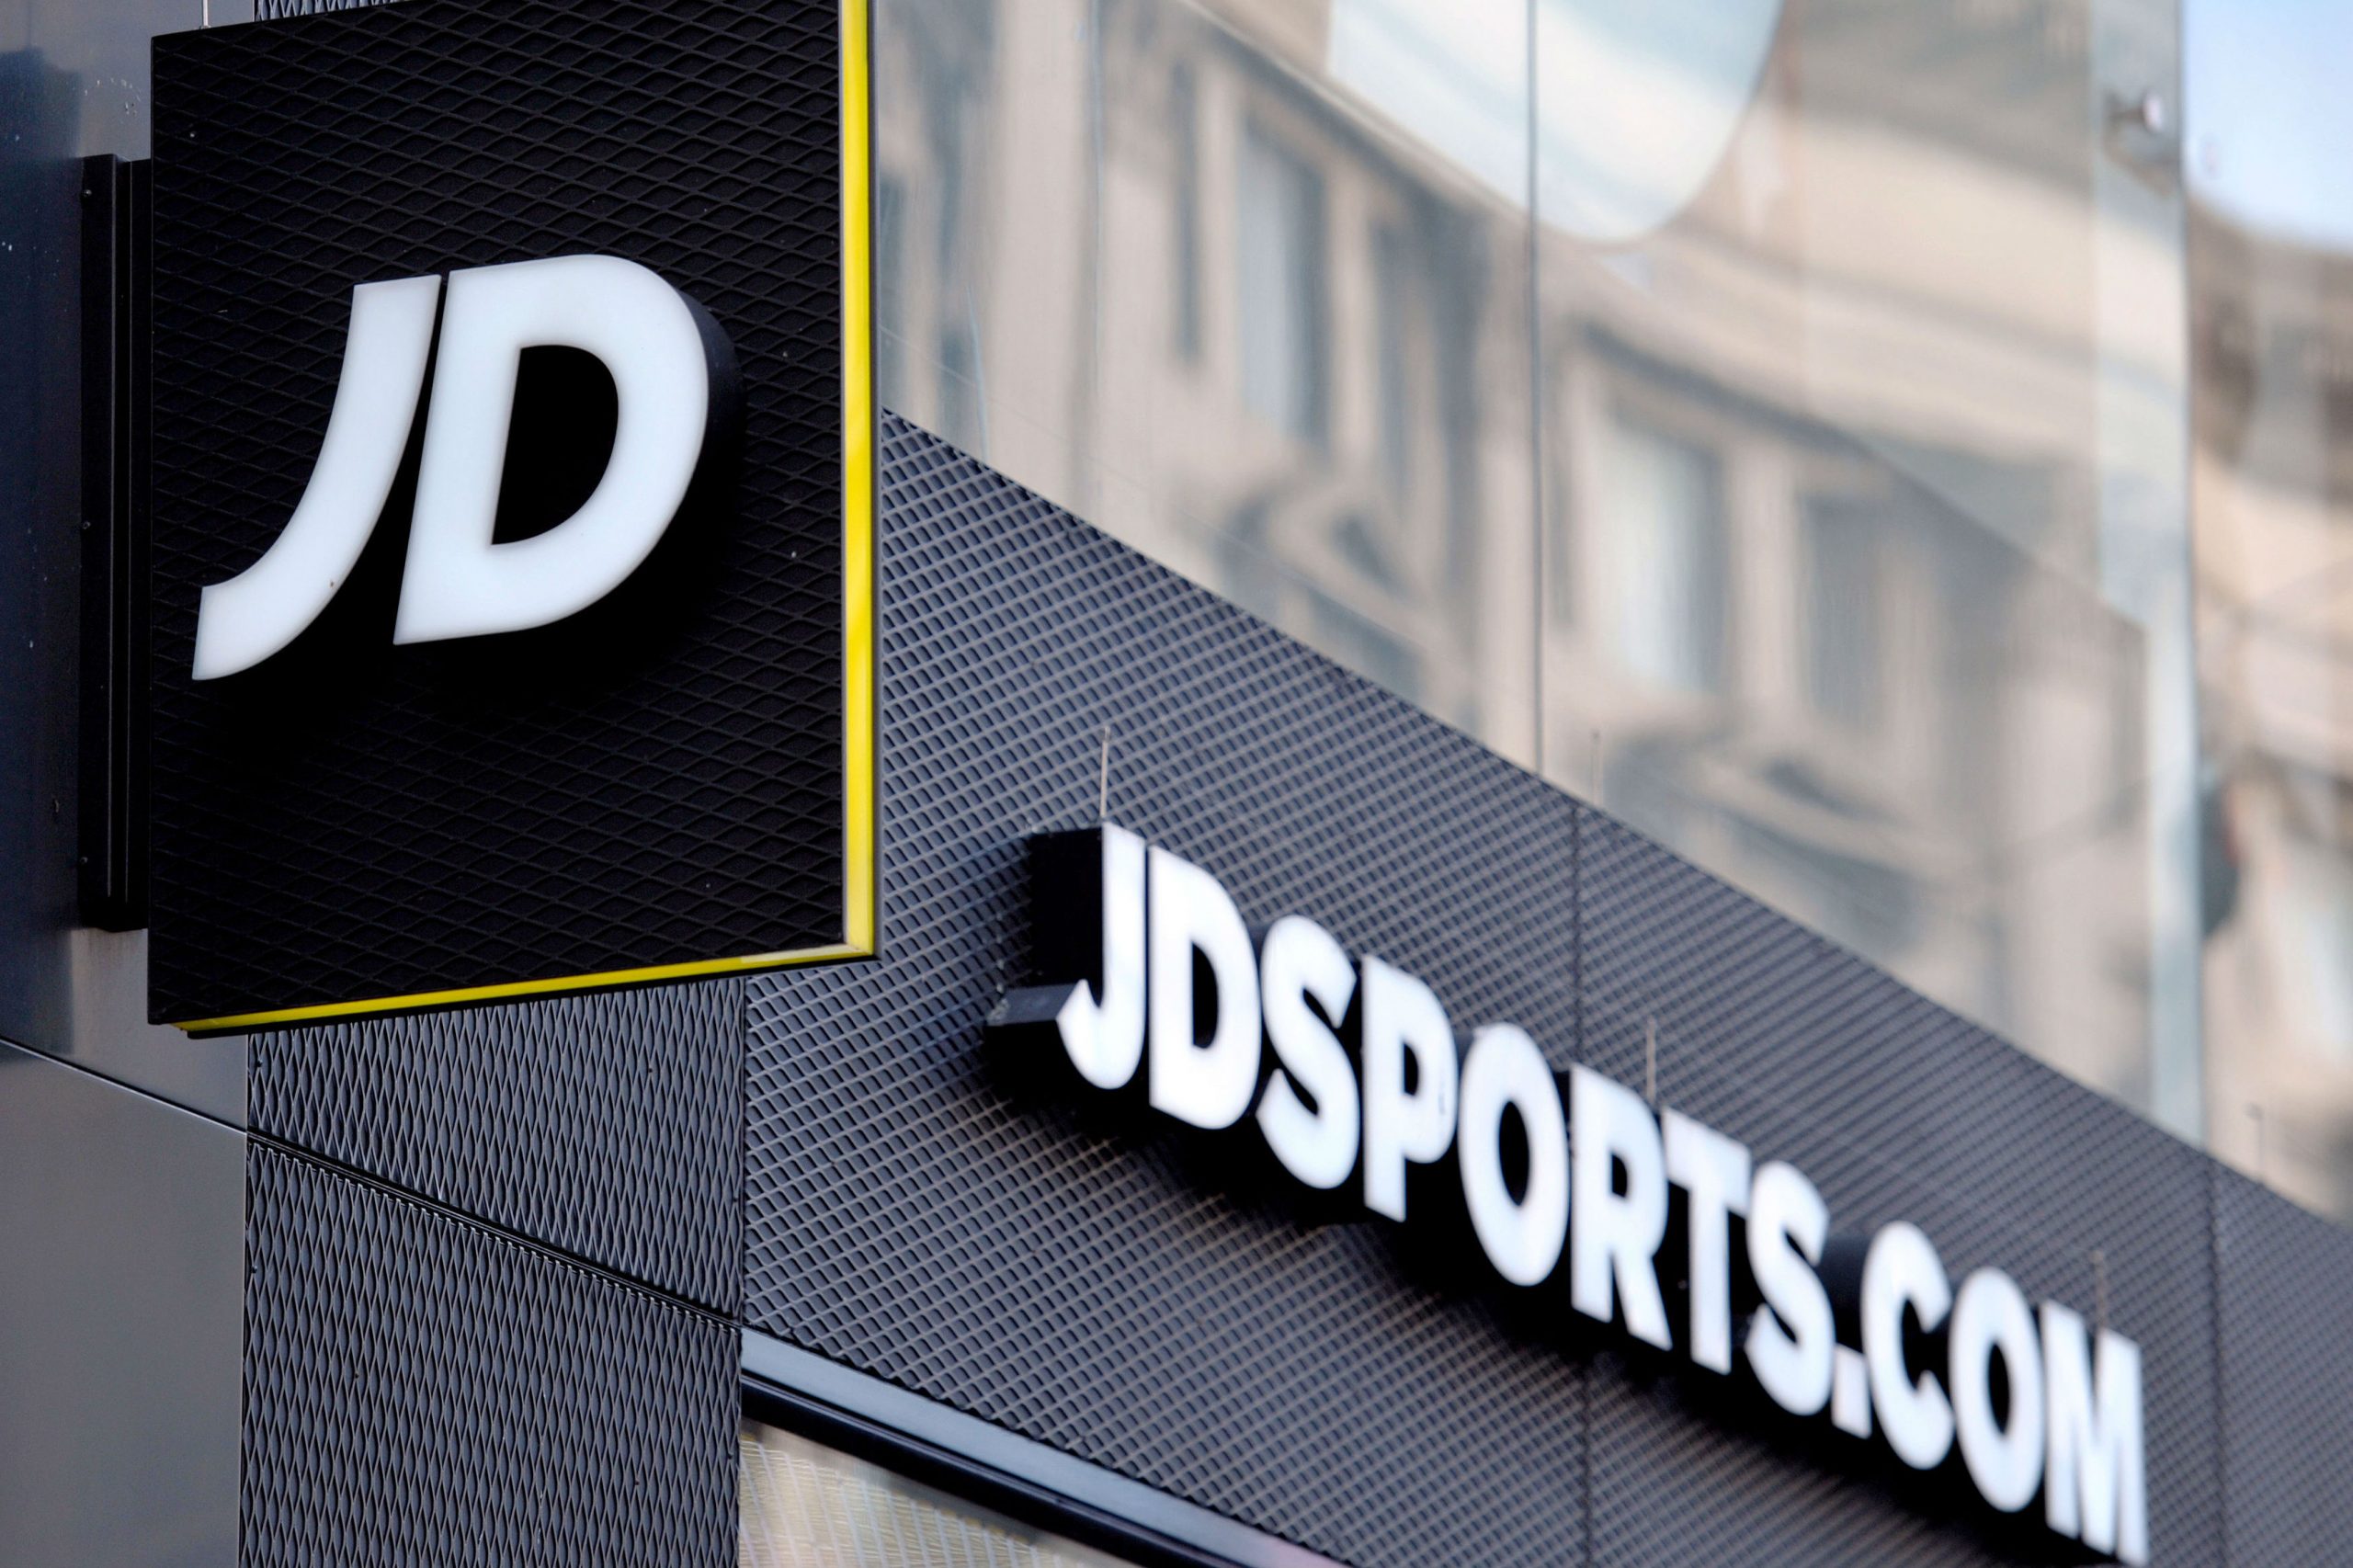 JD Sports announces that its annual results will ahead of previous expectations, expecting full-year headline profit before tax to be at least £900muiring controlling stake in MIG